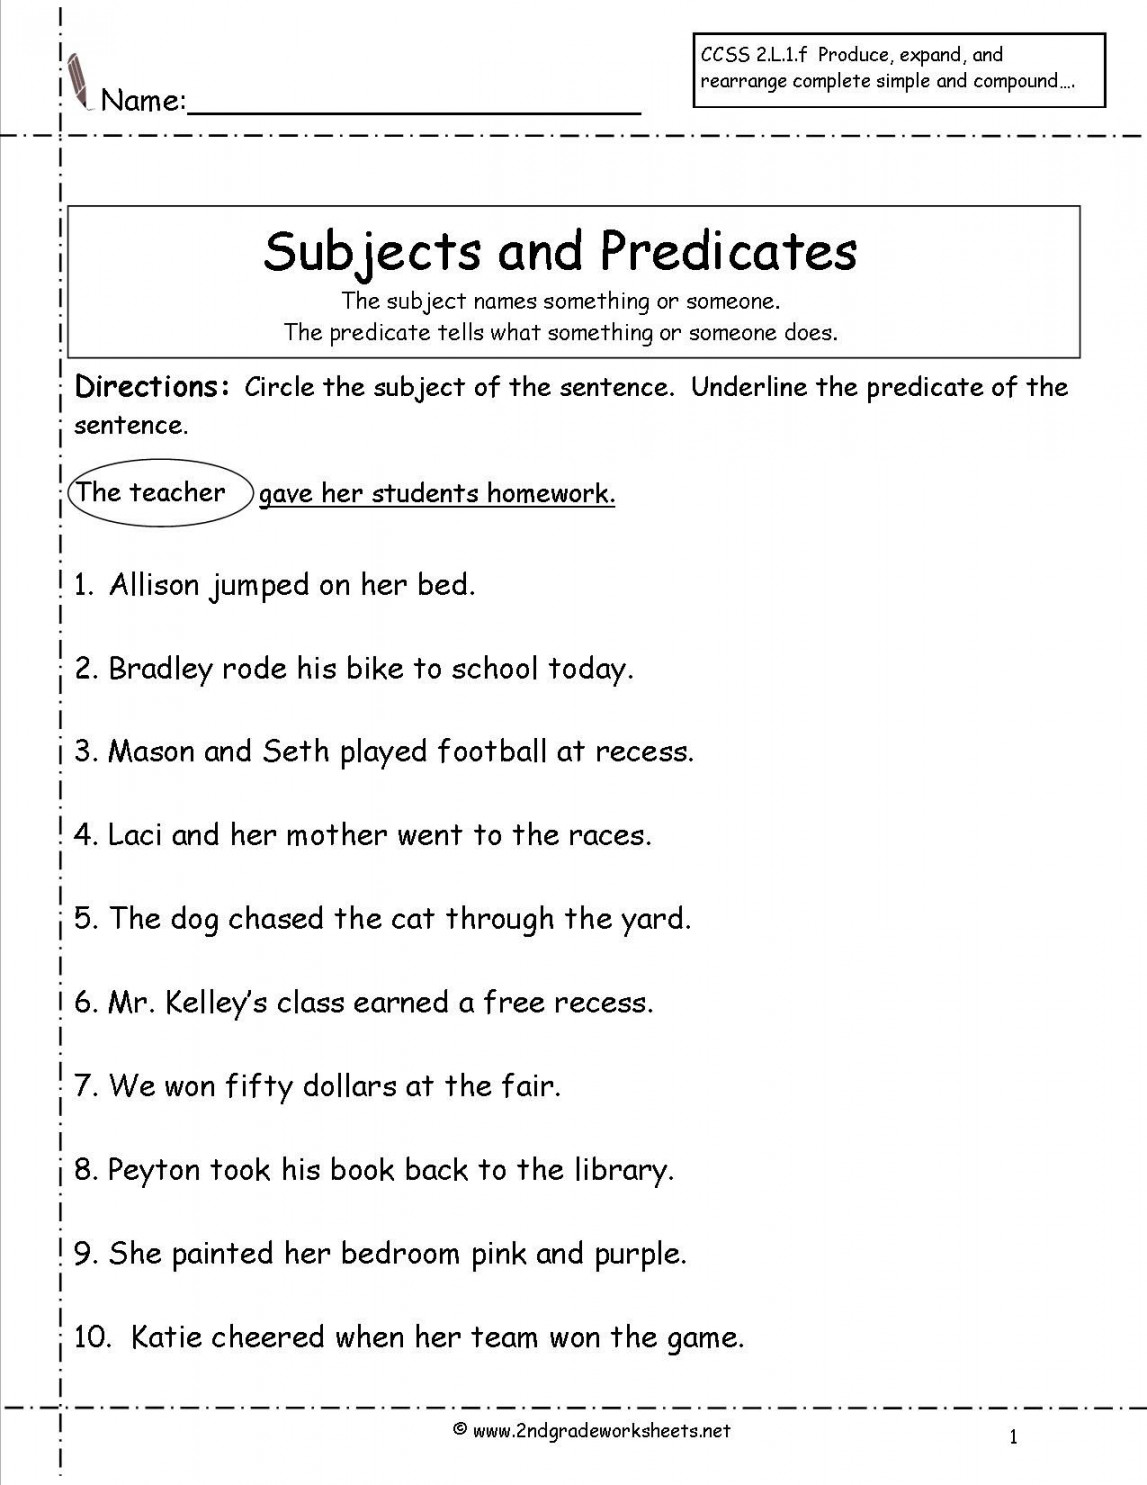 subject predicate worksheets nd grade - Google Search  Subject